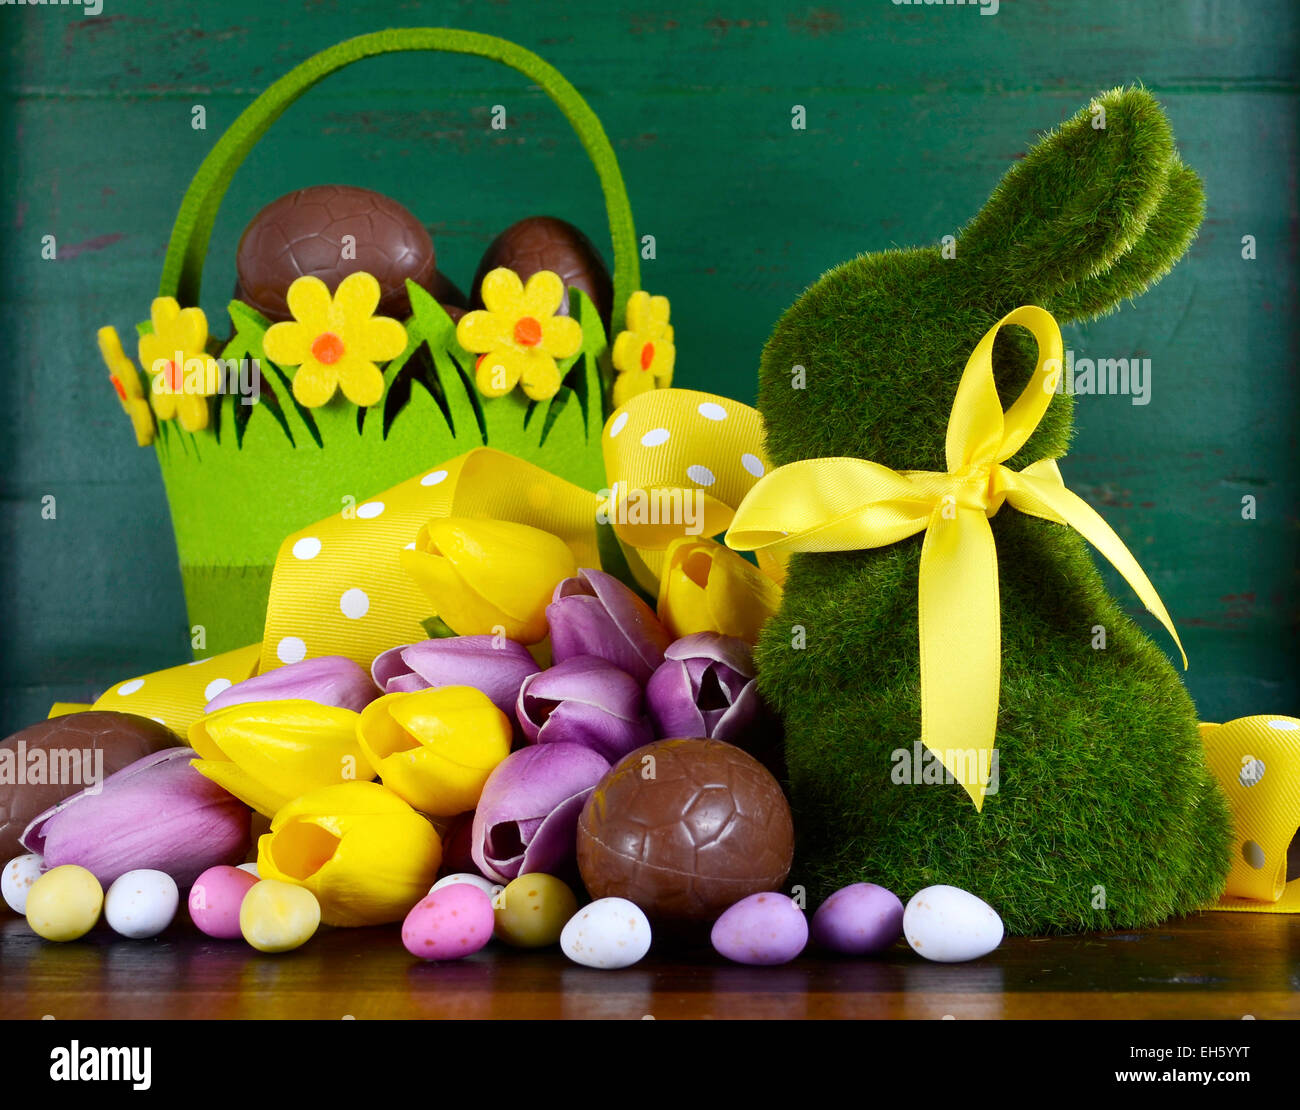 Happy Easter green moss grass bunny rabbit with basket of chocolate eggs and spring tulips against a green wood background. Stock Photo